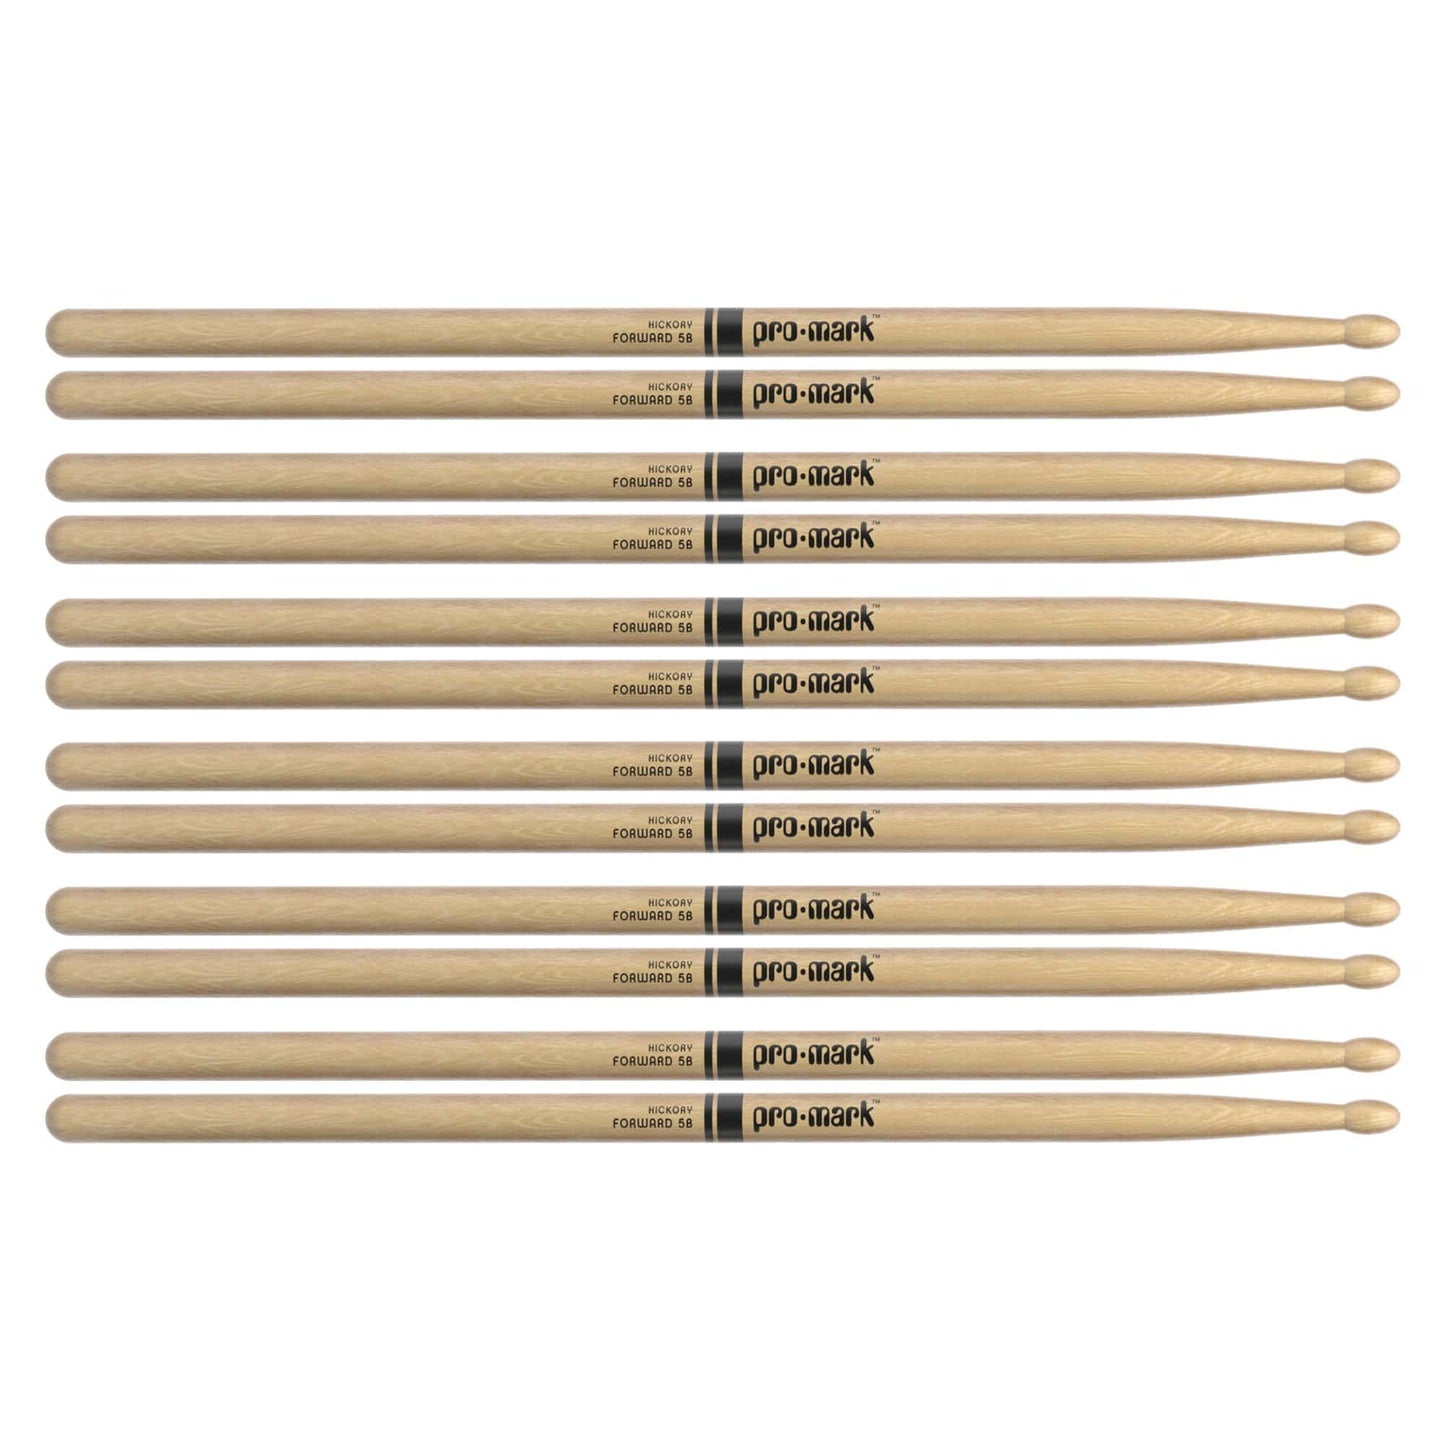 Promark American Hickory 5B Wood Tip Drum Sticks (6 Pair Bundle) Drums and Percussion / Parts and Accessories / Drum Sticks and Mallets